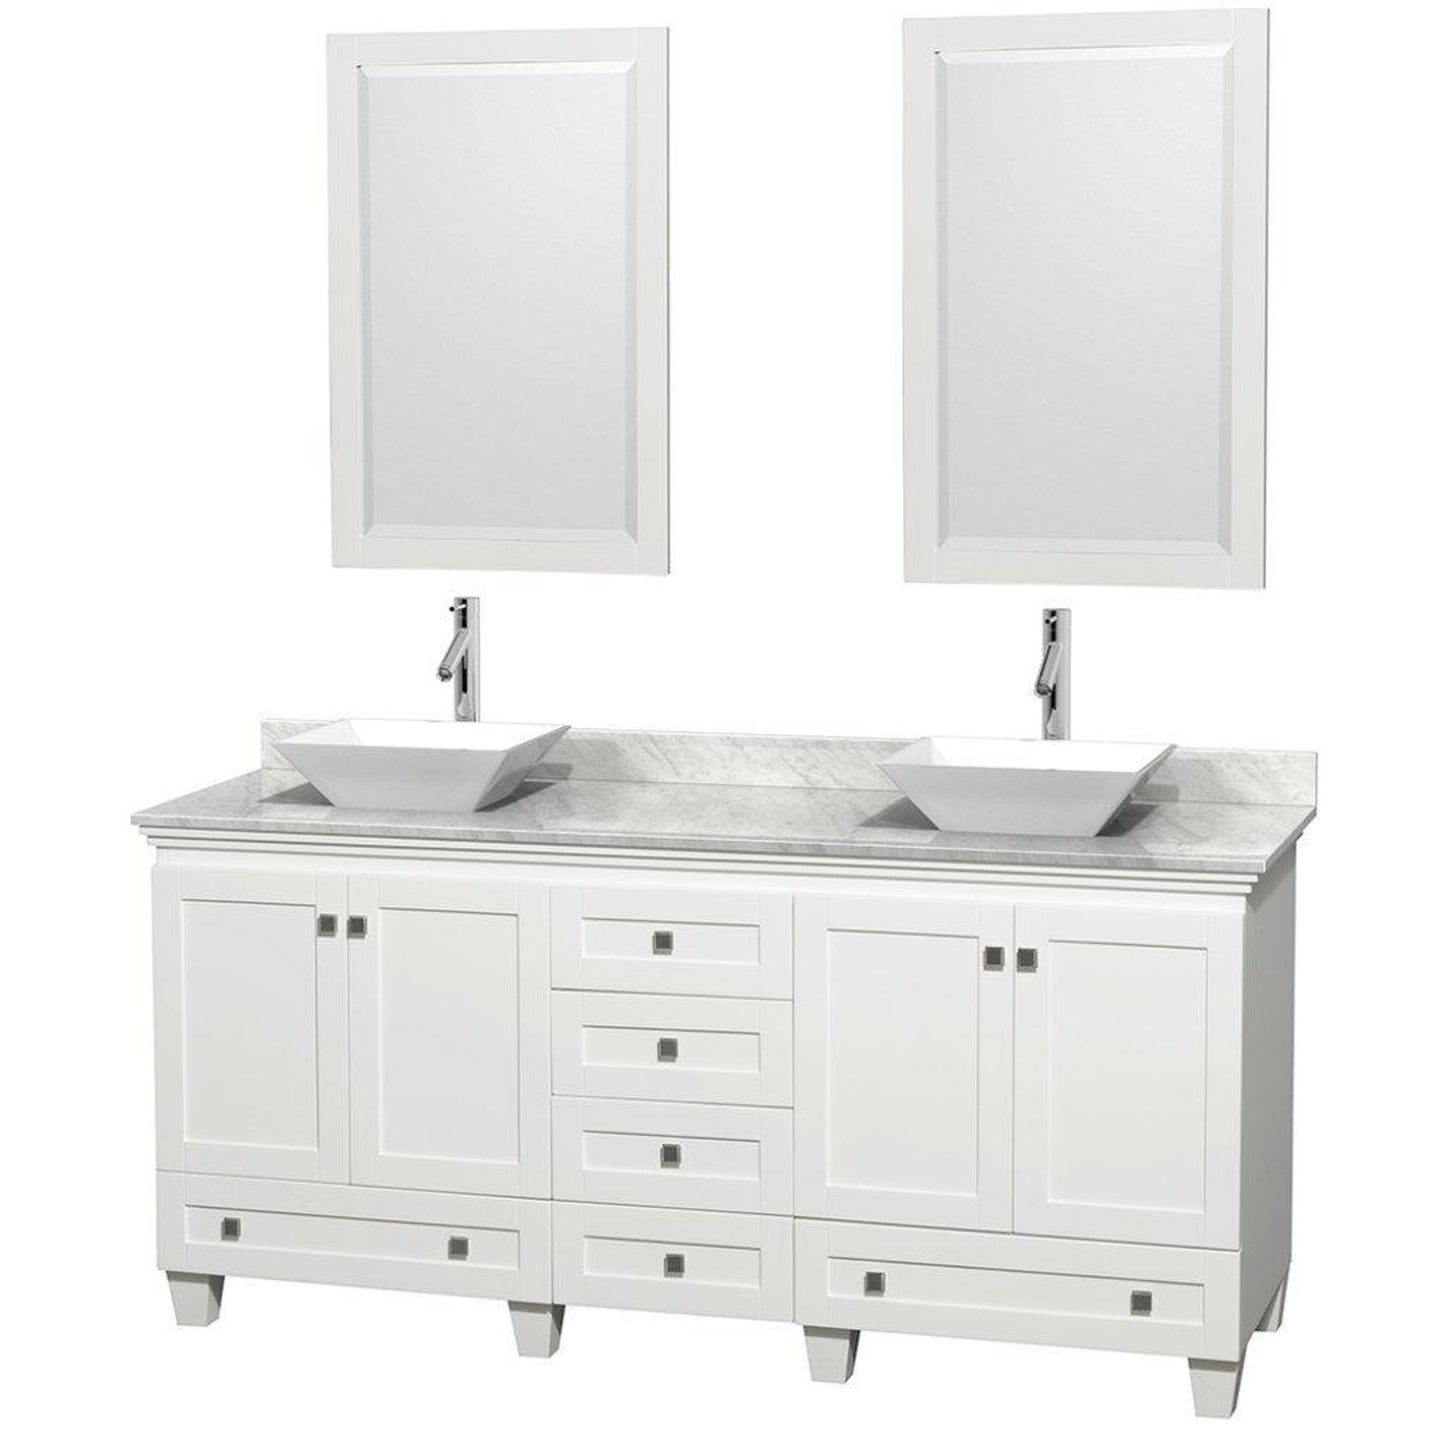 Wyndham Collection Acclaim 72" Double Bathroom White Vanity With White Carrara Marble Countertop And Pyra White Sinks And 2 Set Of 24" Mirror